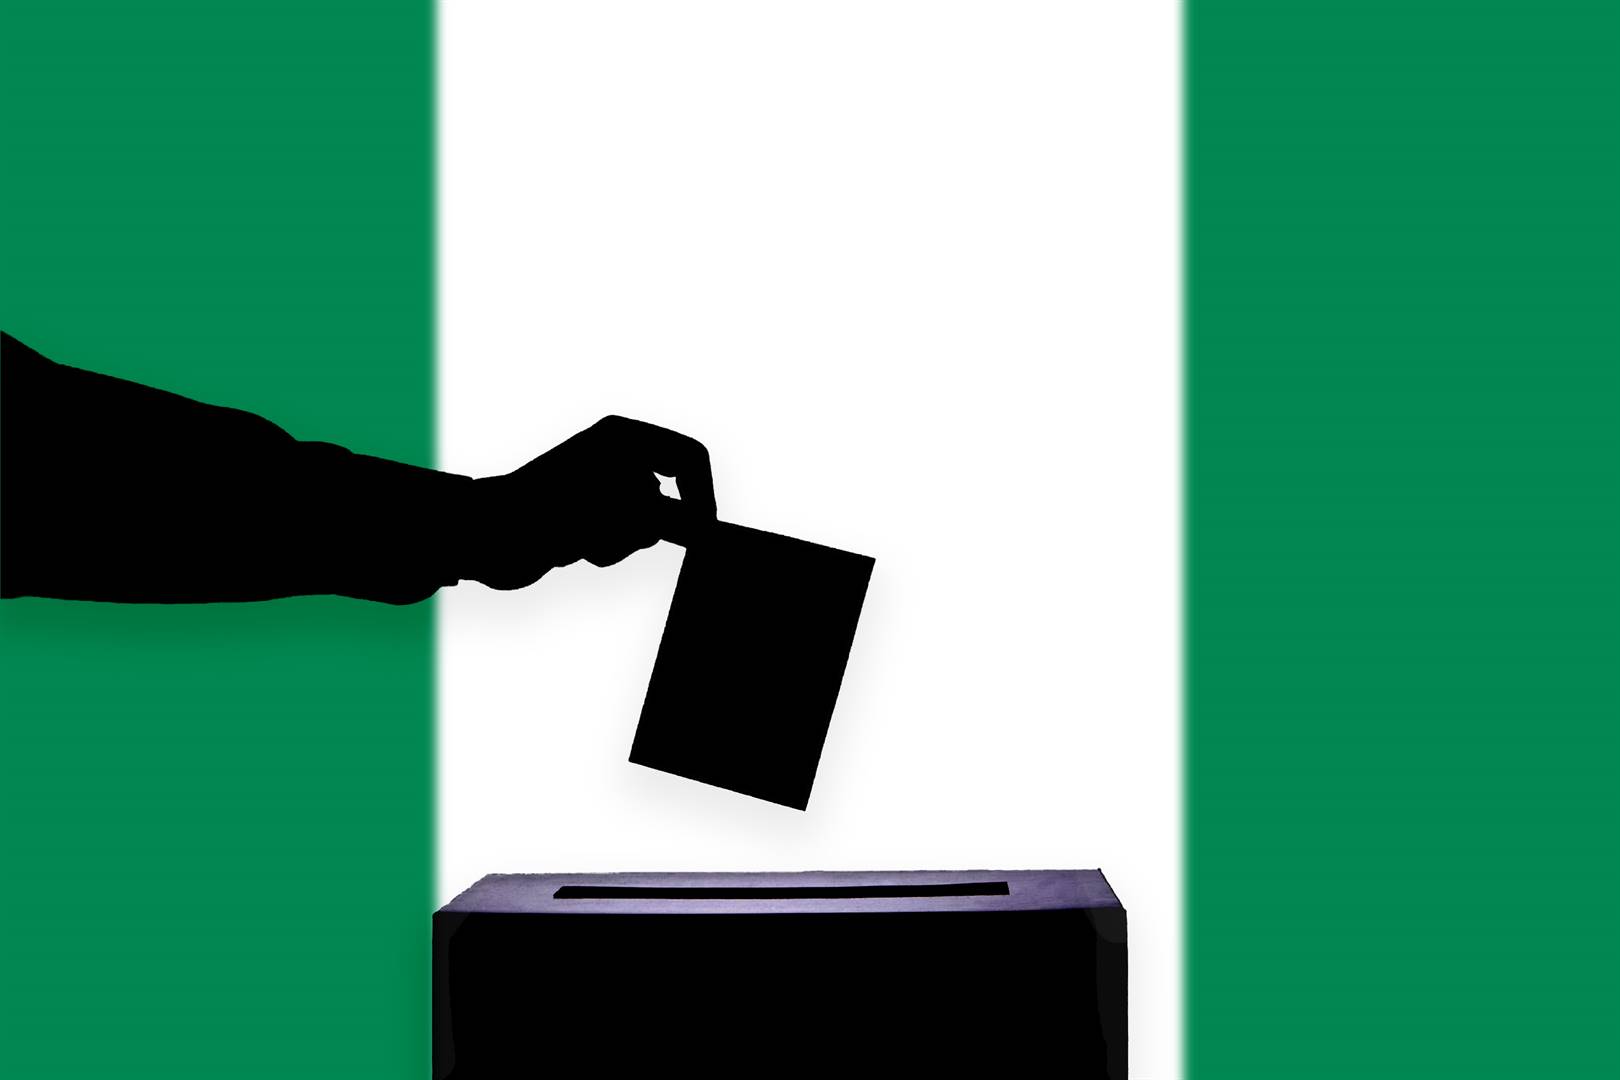 President Muhammadu Buhari was respected in the north and southwest of Nigeria but had lost some support during the recent election, which had a record low turnout at just 35.6% of eligible voters, the lowest in Nigeria’s 20-year history as a democracy. Picture: iStock/Gallo Images